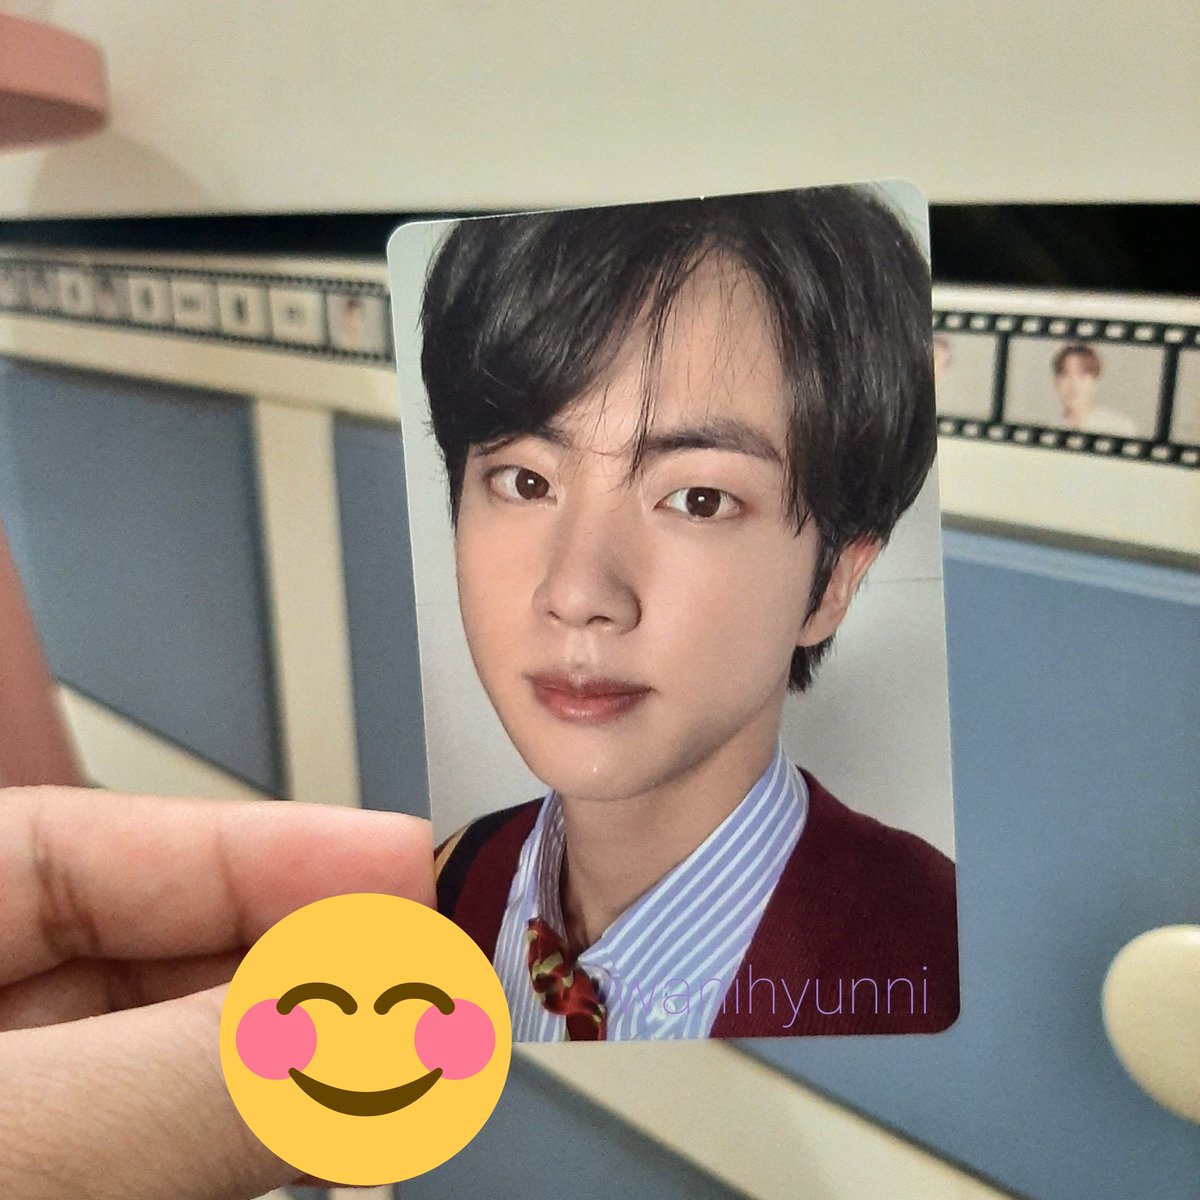 WTS | WTT 🇲🇾 Jin MOTS 7 Ver 4 💰RM18 inc postage to WM OR Trade to: Ver 1 / Ver 3 ⚠️pc has defect, a dot on his chin. If wtt, if hv defects but must let me know DM if interested Help rt, tq ♡ @pasarBTS @pasarbtsXtxt @btstradinginmy #pasarBTS @BTSMarketMY @BTStrading_MY